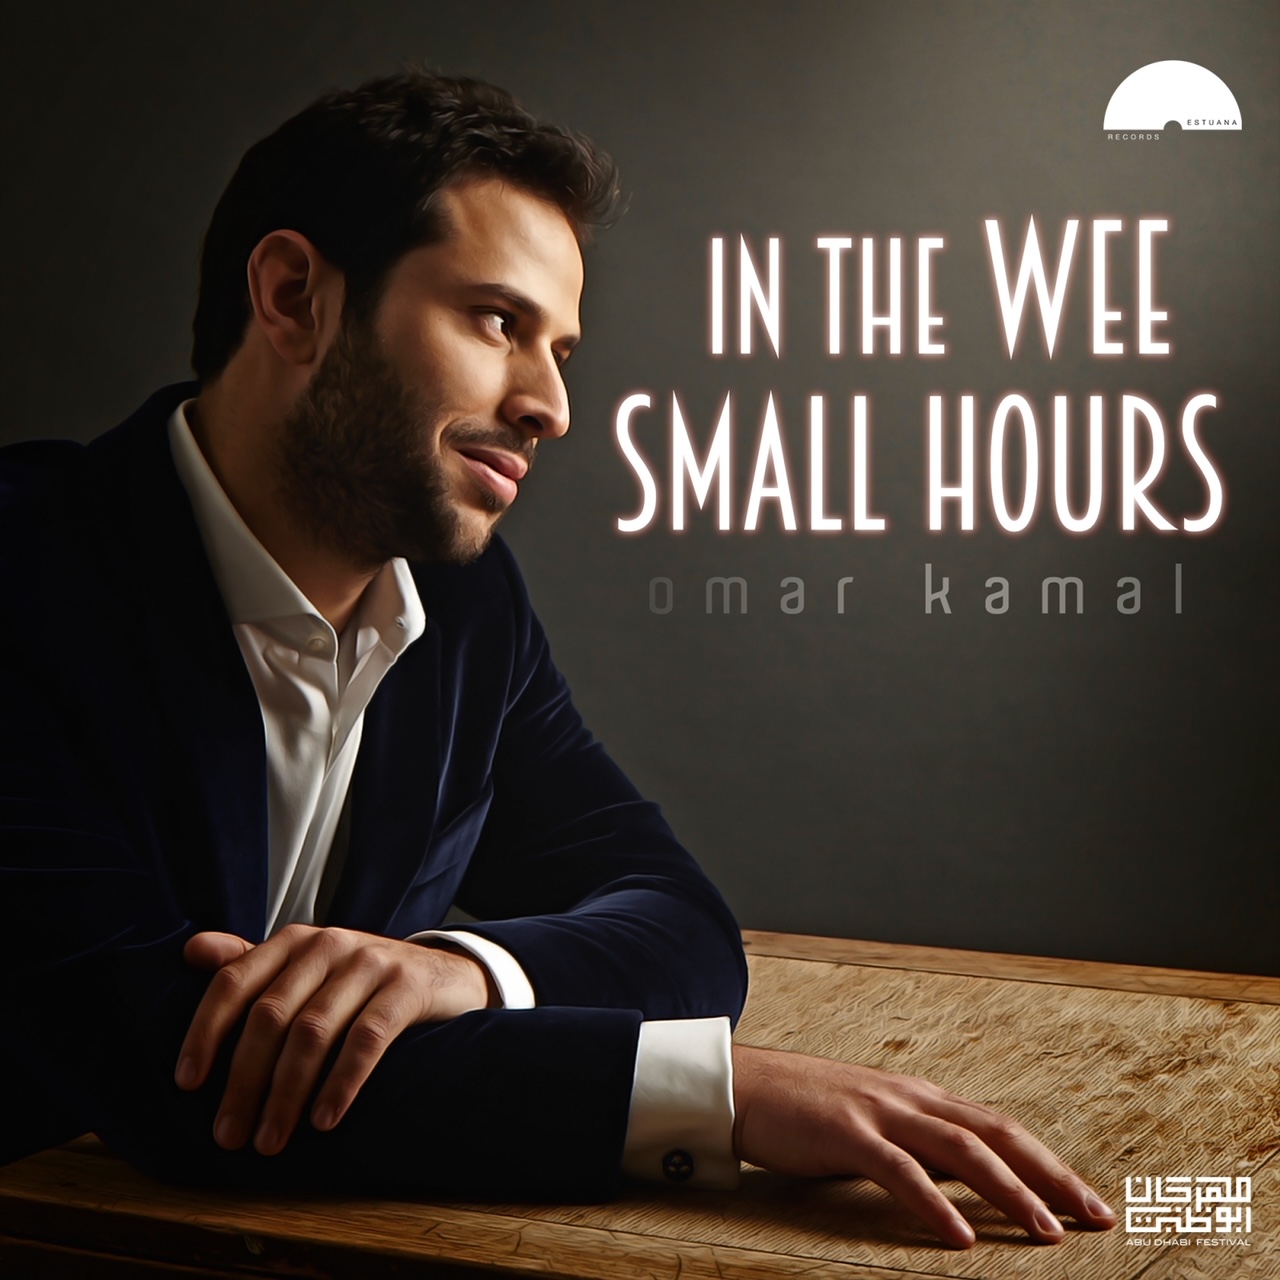 Omar Kamal Releases ‘In The Wee Small Hours’ In Preparation For His New Album And World Tour In Collaboration With Abu Dhabi Festival 2021